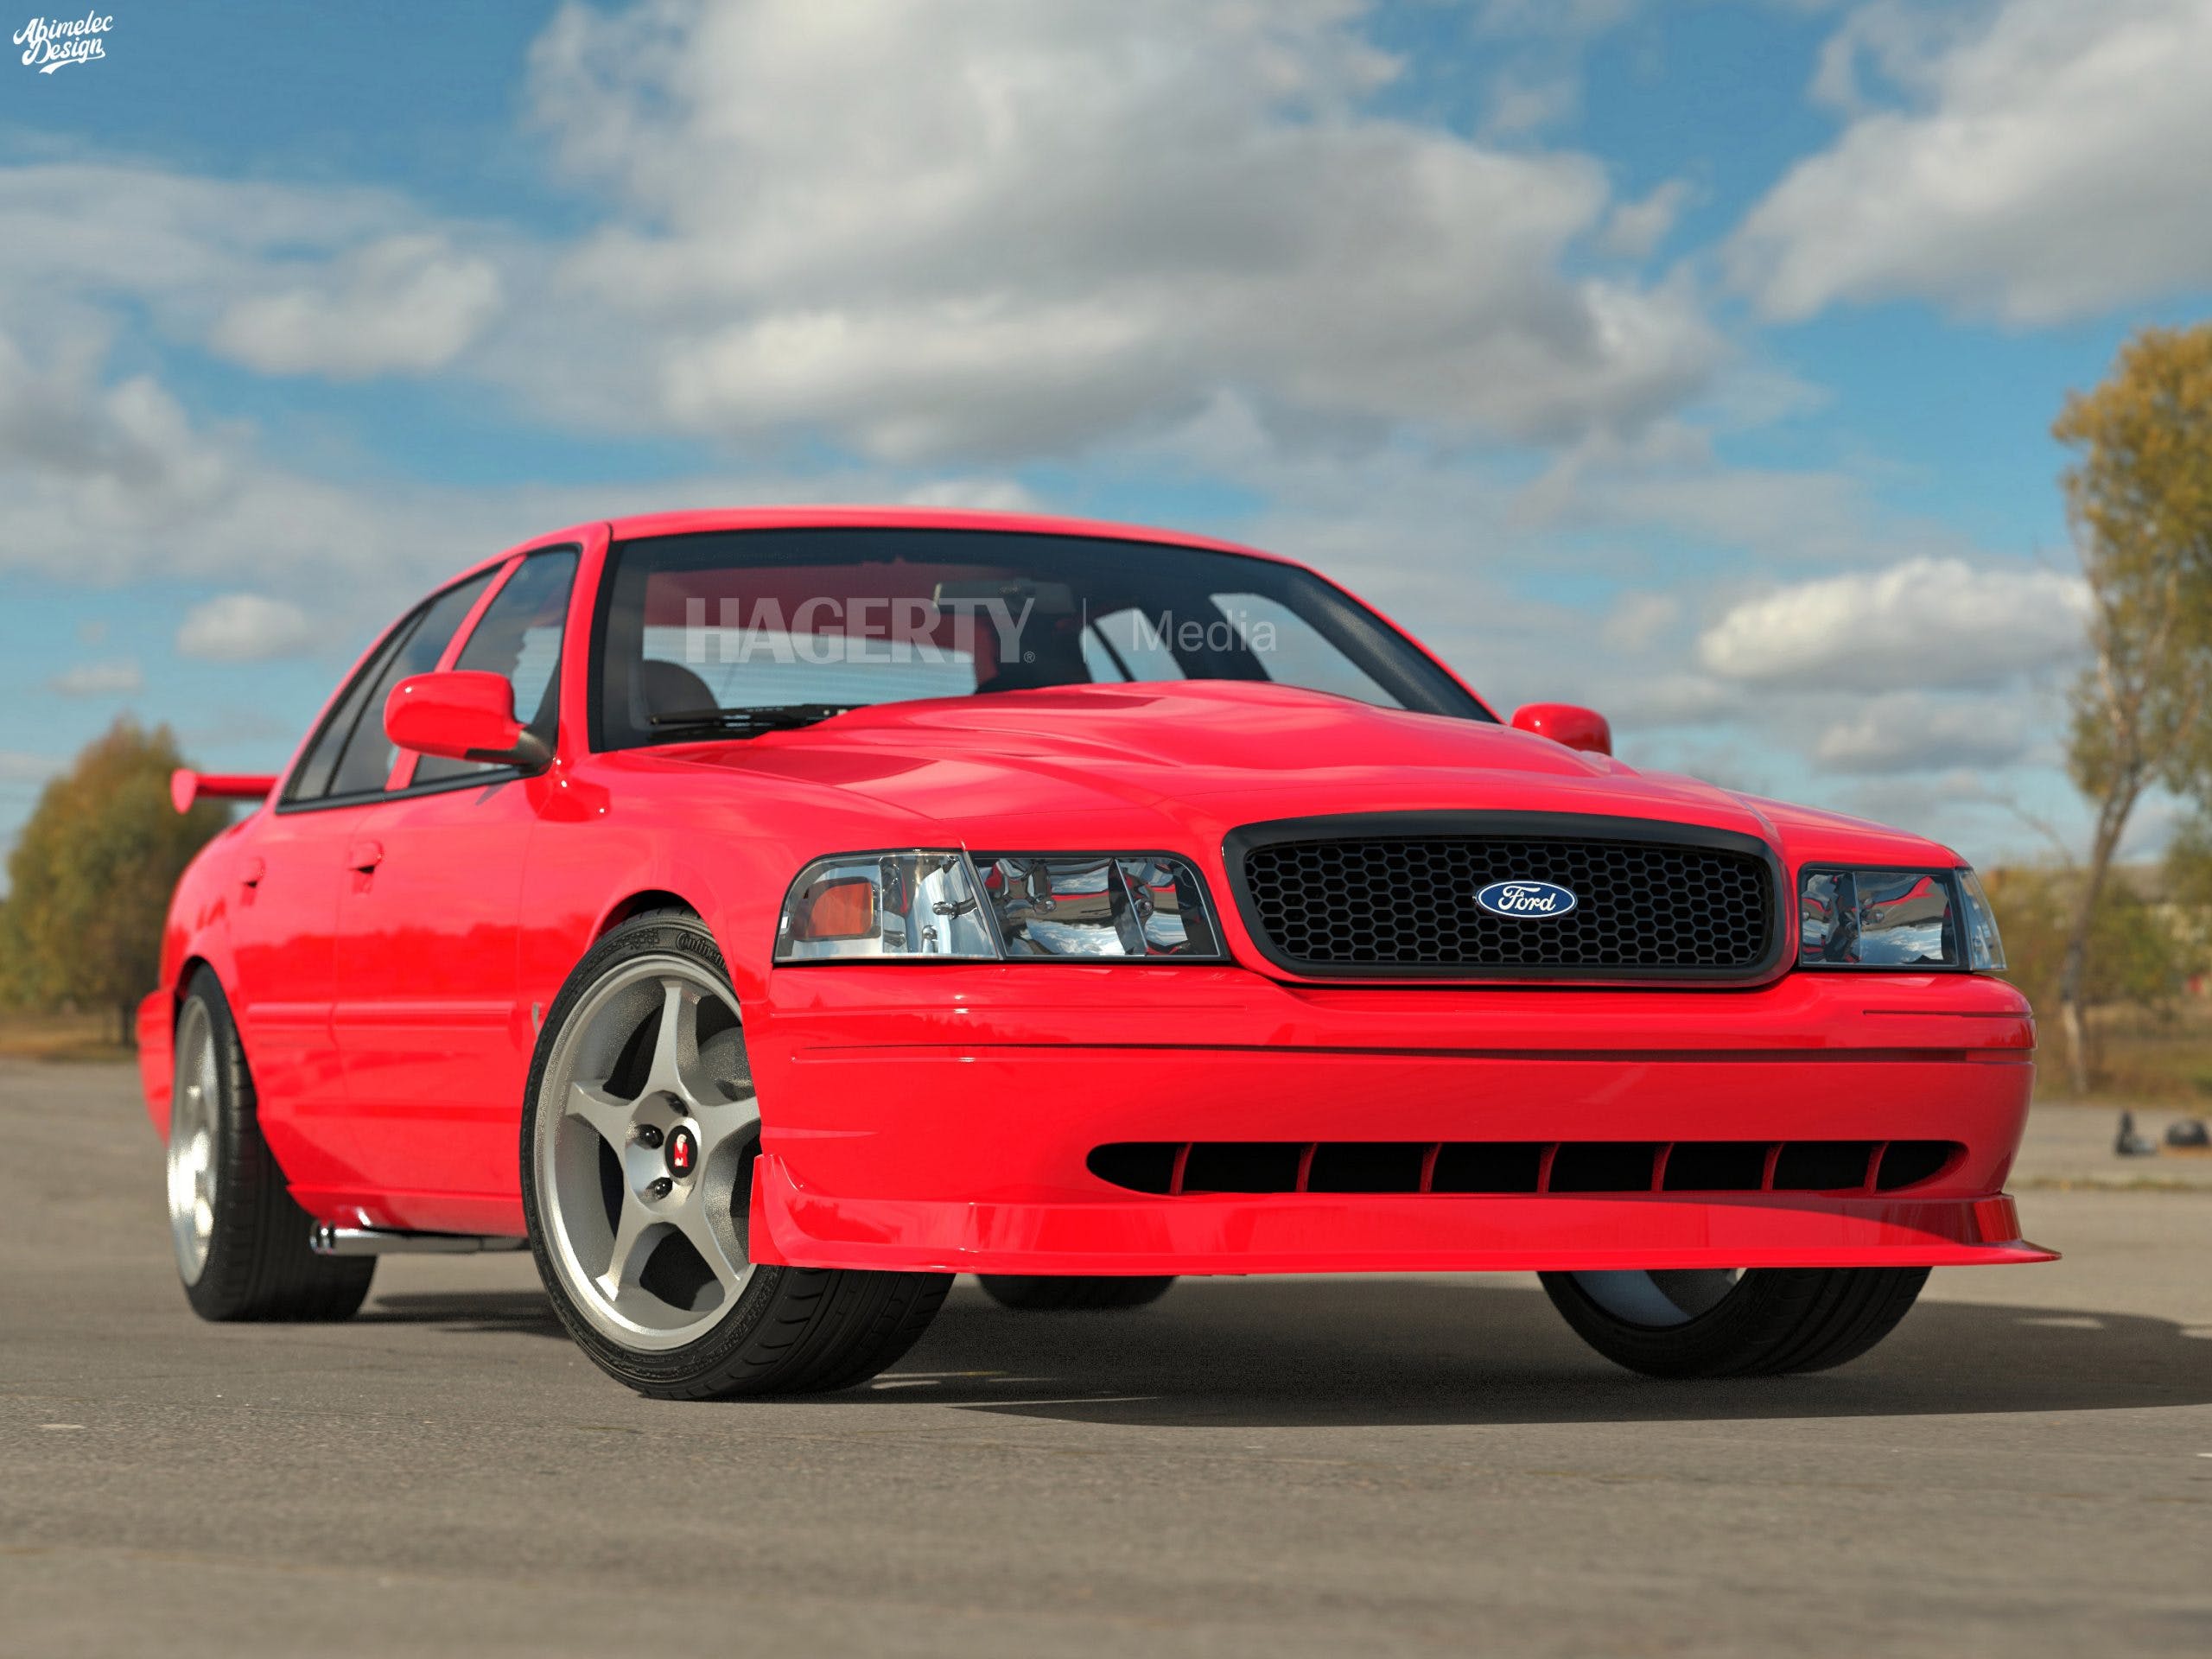 What If? 2000 Ford Crown Victoria Cobra R - Hagerty Media